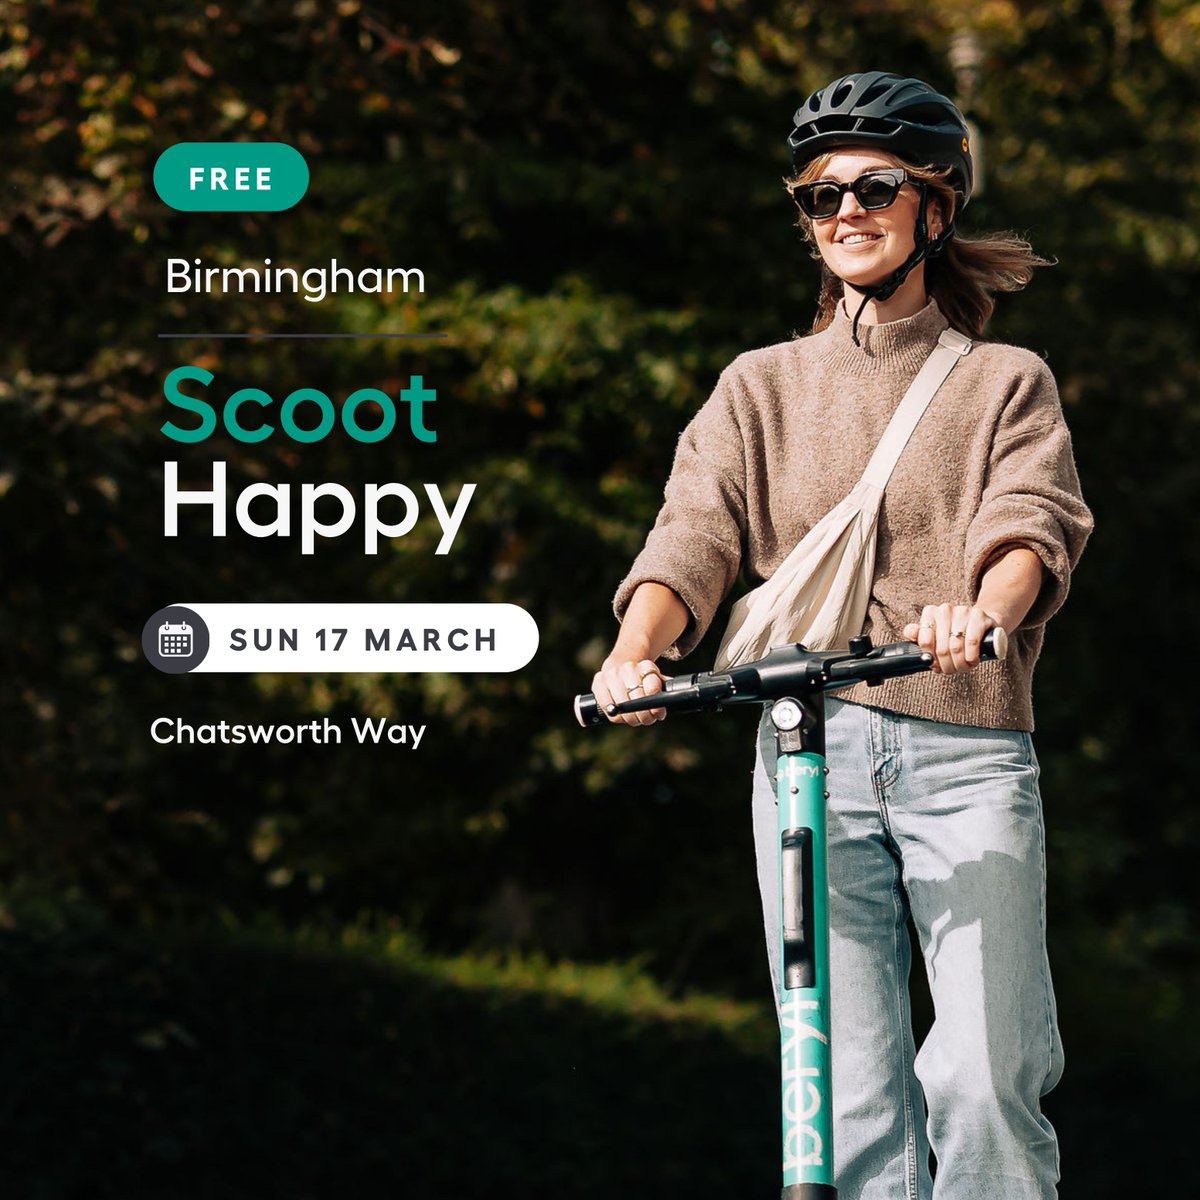 Birmingham, you have exactly one week to go until your next Scoot Happy event! Learn how to get riding on the road, with confidence. Plus all attendees get 200 minutes free with Beryl. 🛴 Sign up now: eventbrite.co.uk/o/beryl-335735… @TransportForWM @ecobirmingham #Birmingham